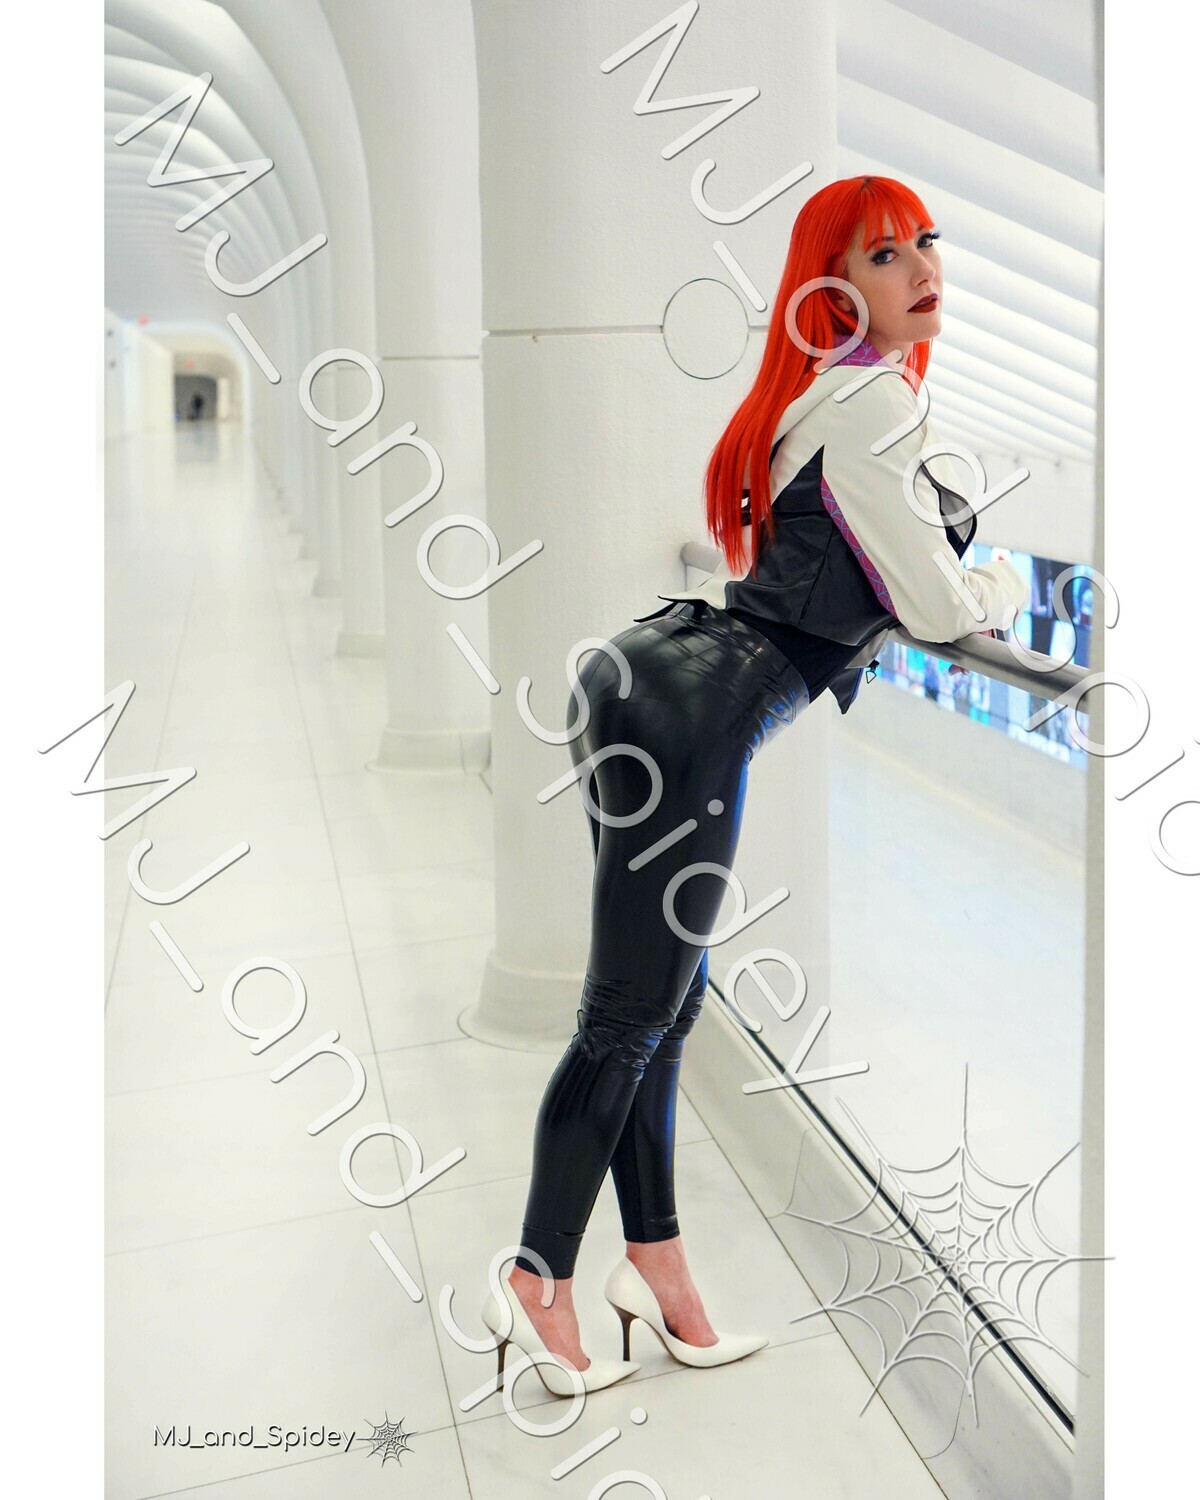 Marvel - Spider-Man - Mary Jane Watson - Classic 9 - Digital Cosplay Image (@MJ_and_Spidey, MJ and Spidey, Comics)